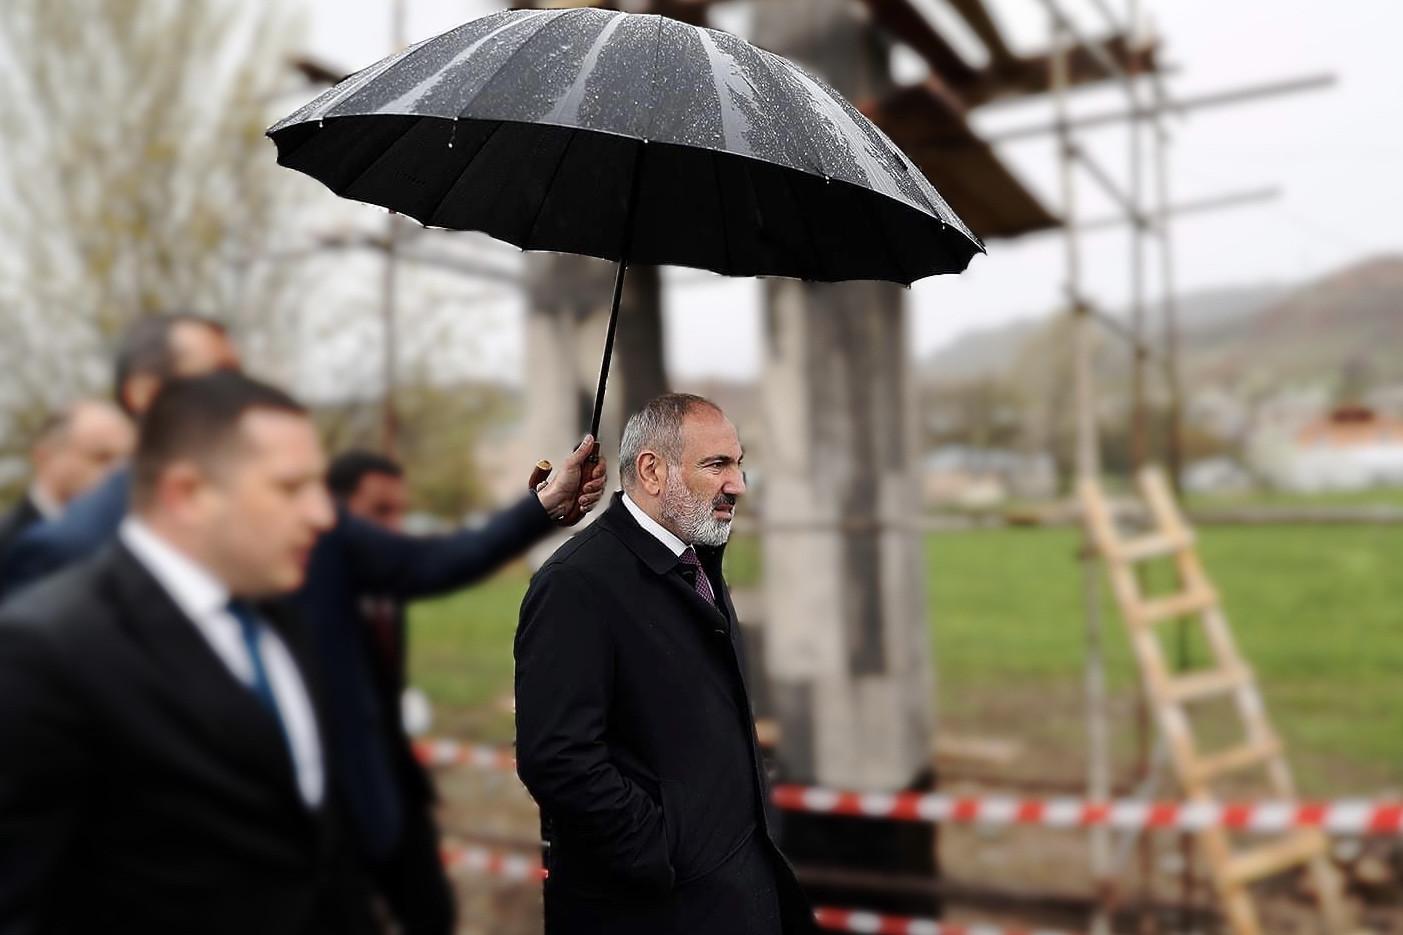 Woman Faces Five Years in Jail for Throwing Umbrella at Pashinyan